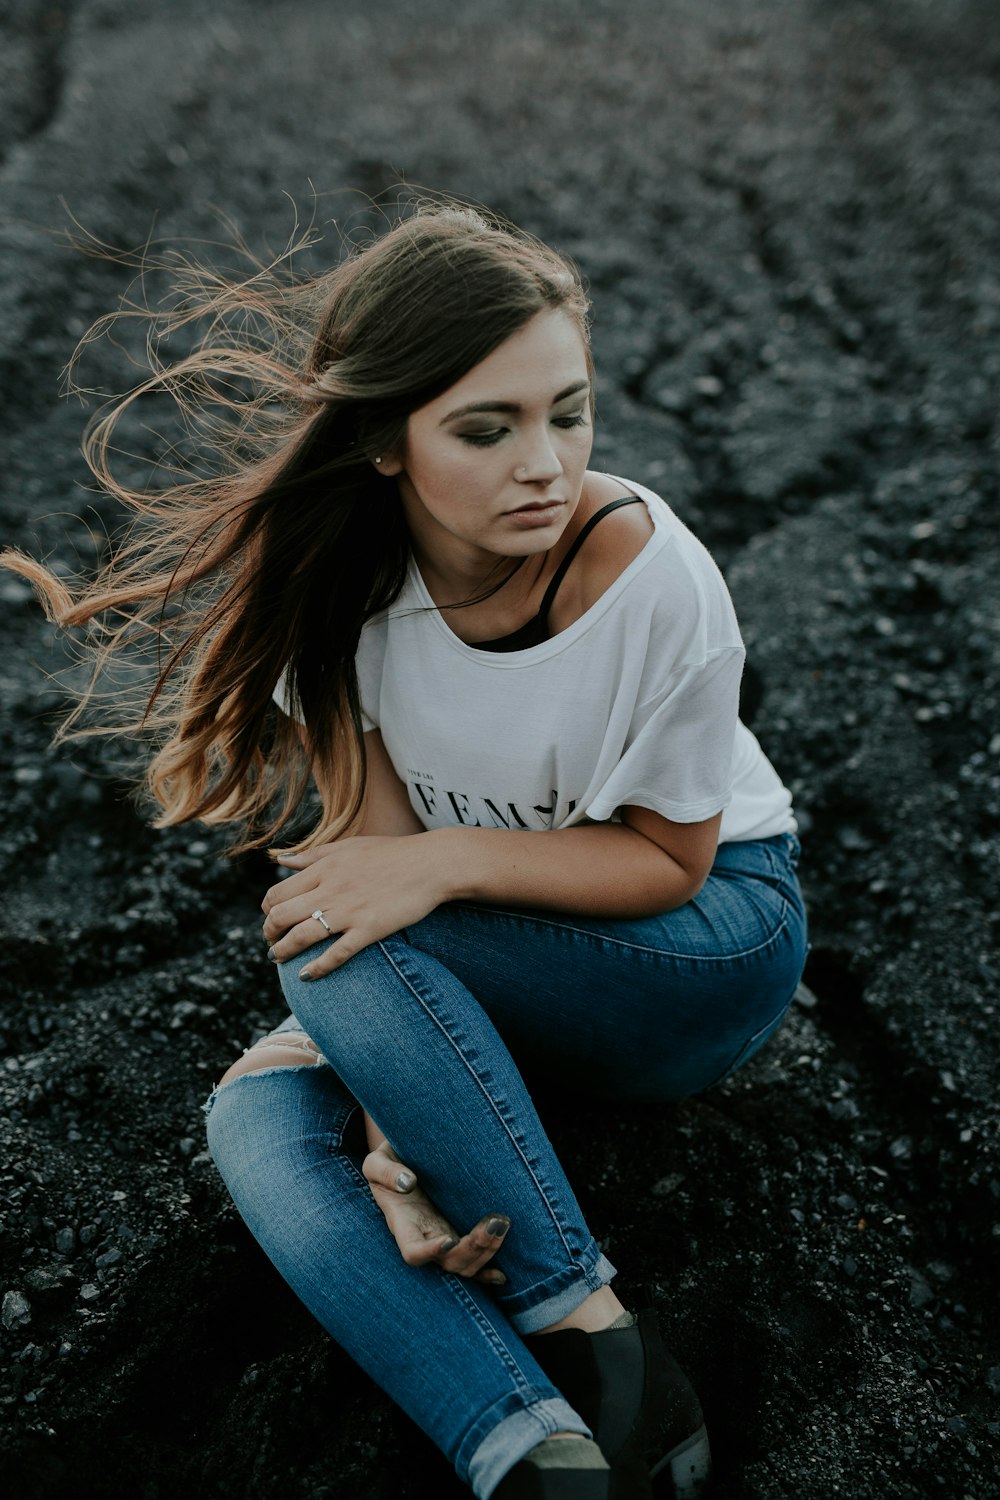 woman wearing scoop-neck shirt and distressed jeans sitting on ground while holding knee